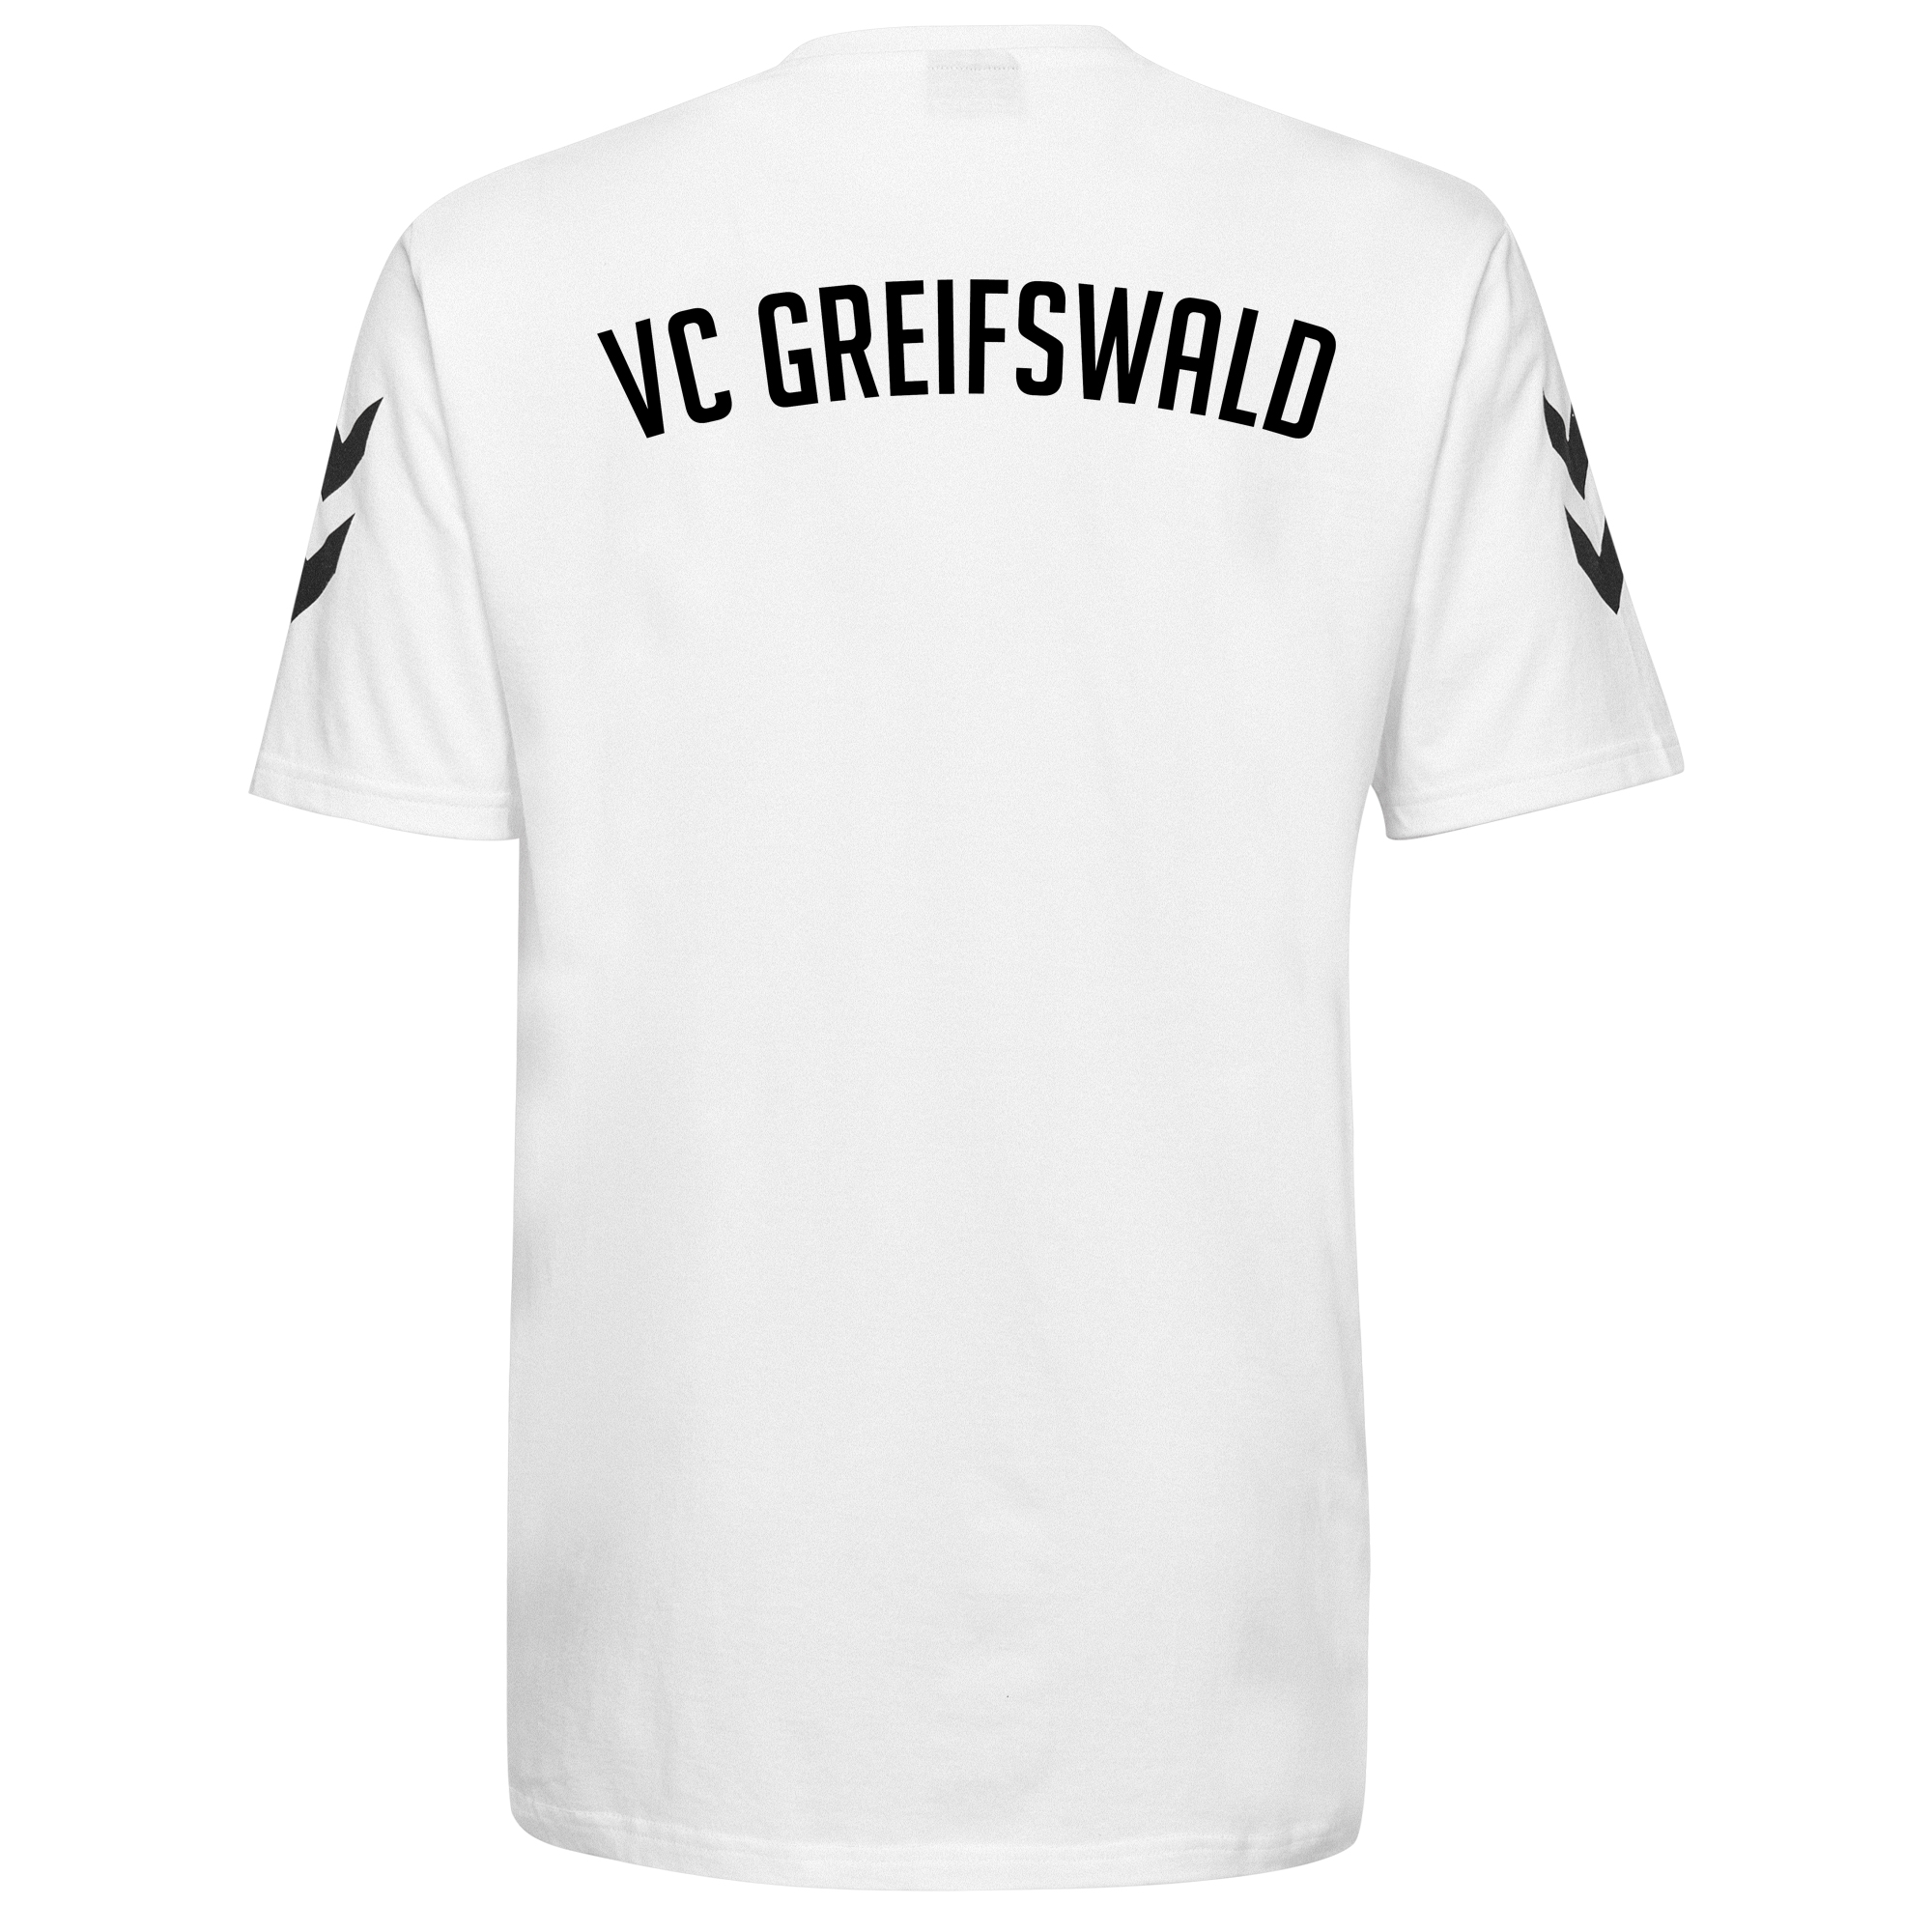 VC Greifswald T-Shirt Open Minded